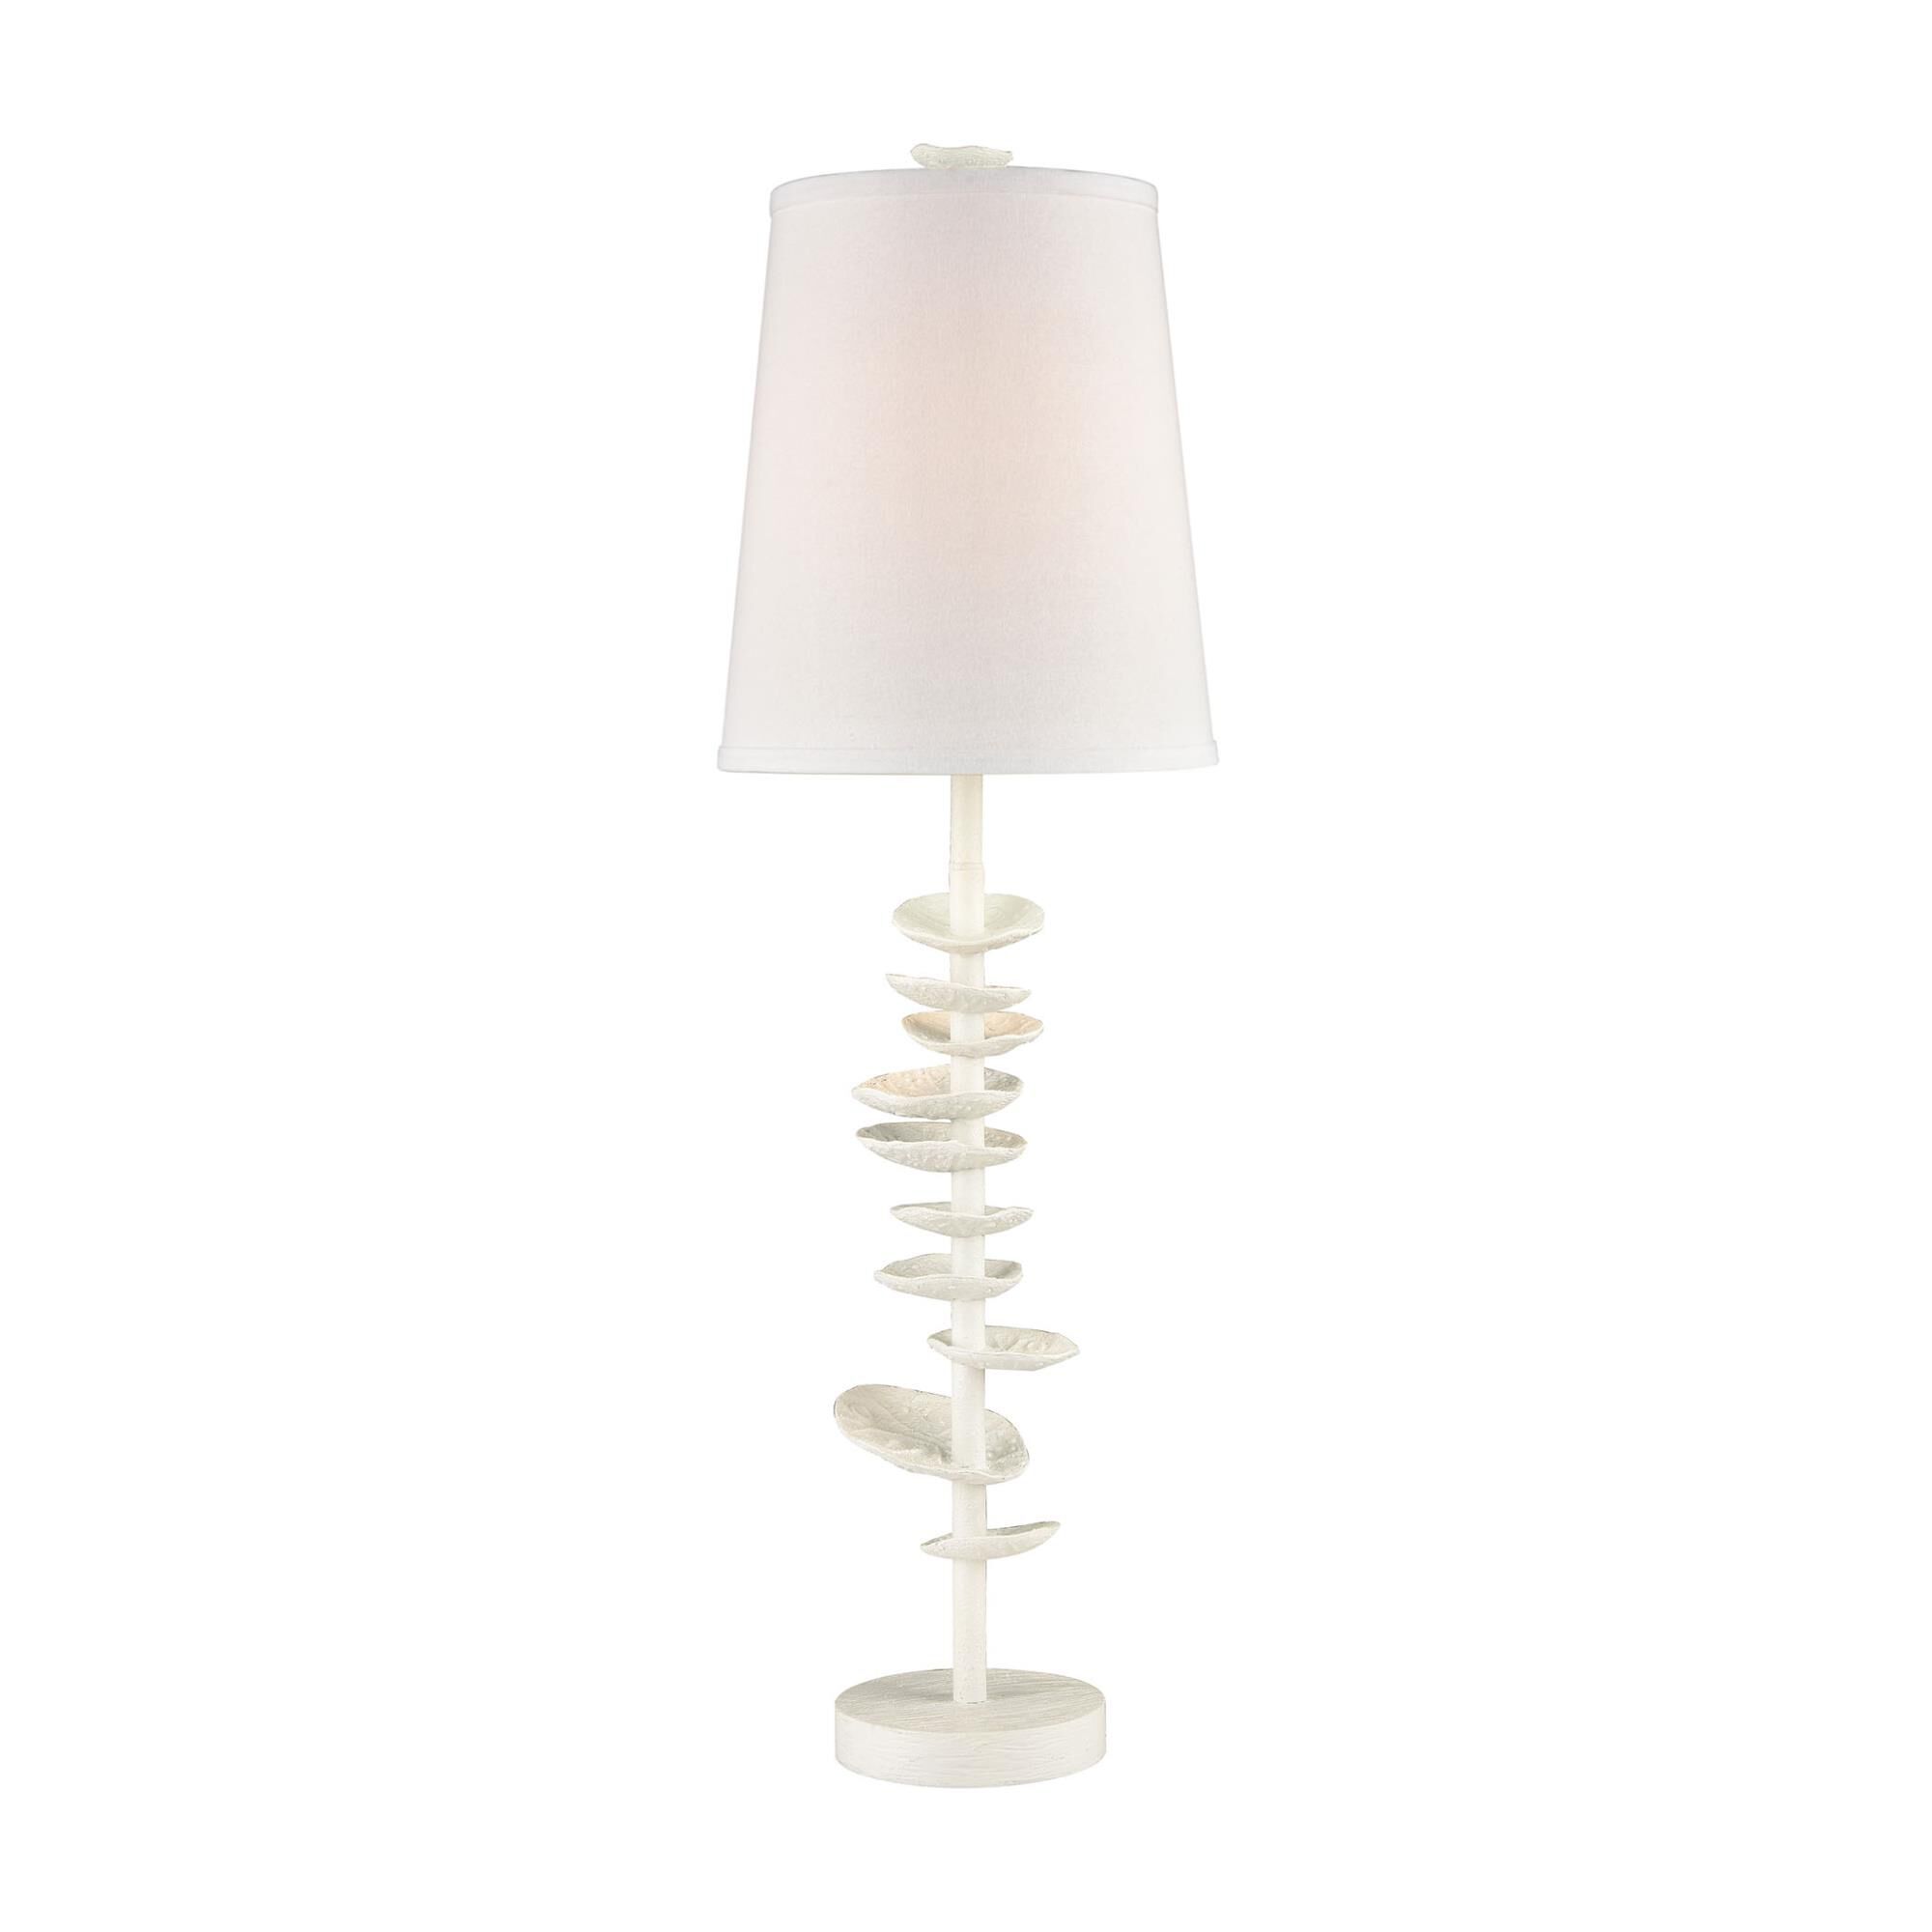 Winona 33 Inch Table Lamp by ELK Home | Capitol Lighting 1800lighting.com